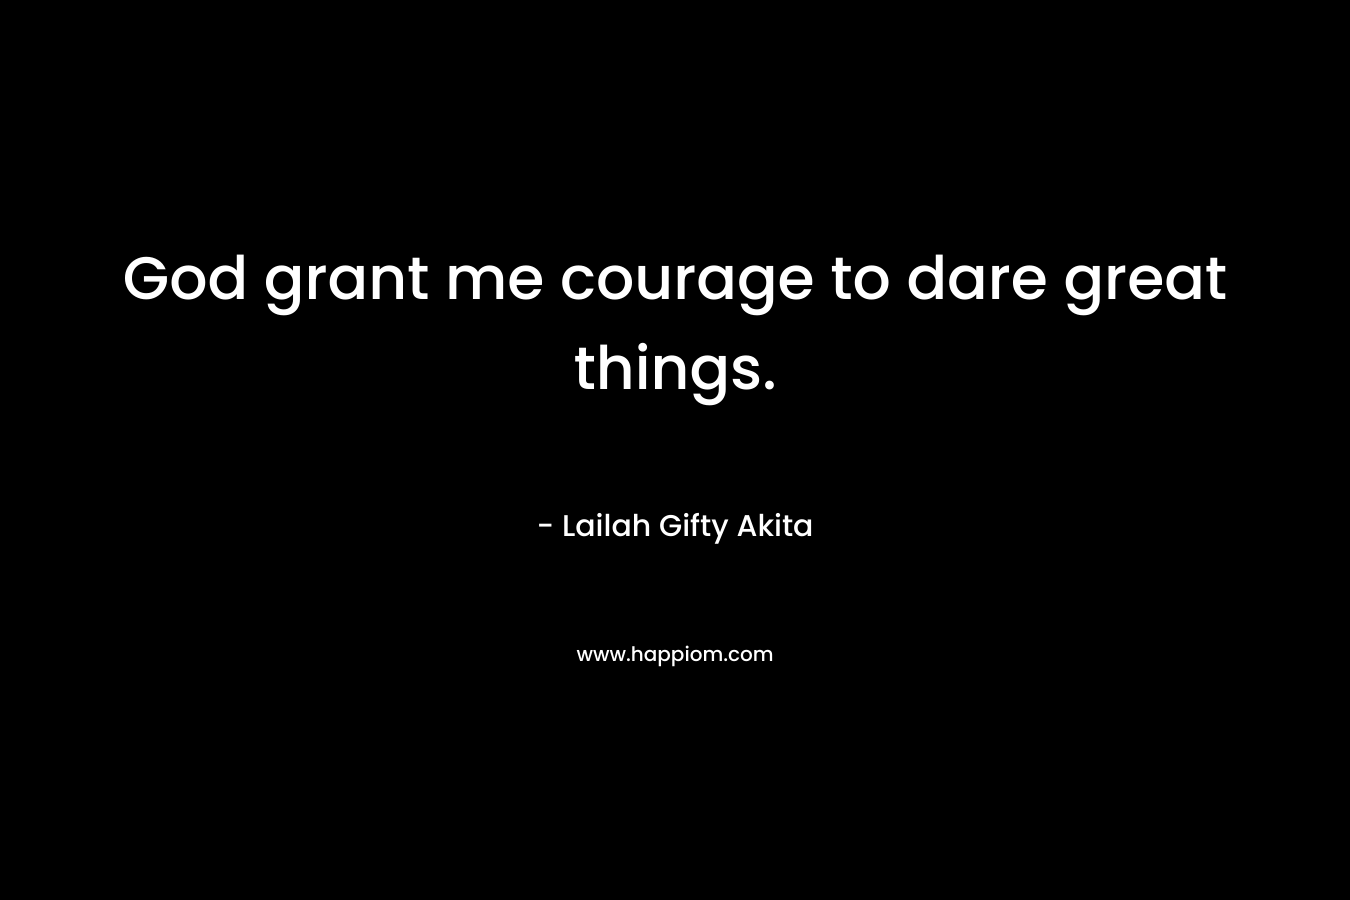 God grant me courage to dare great things.